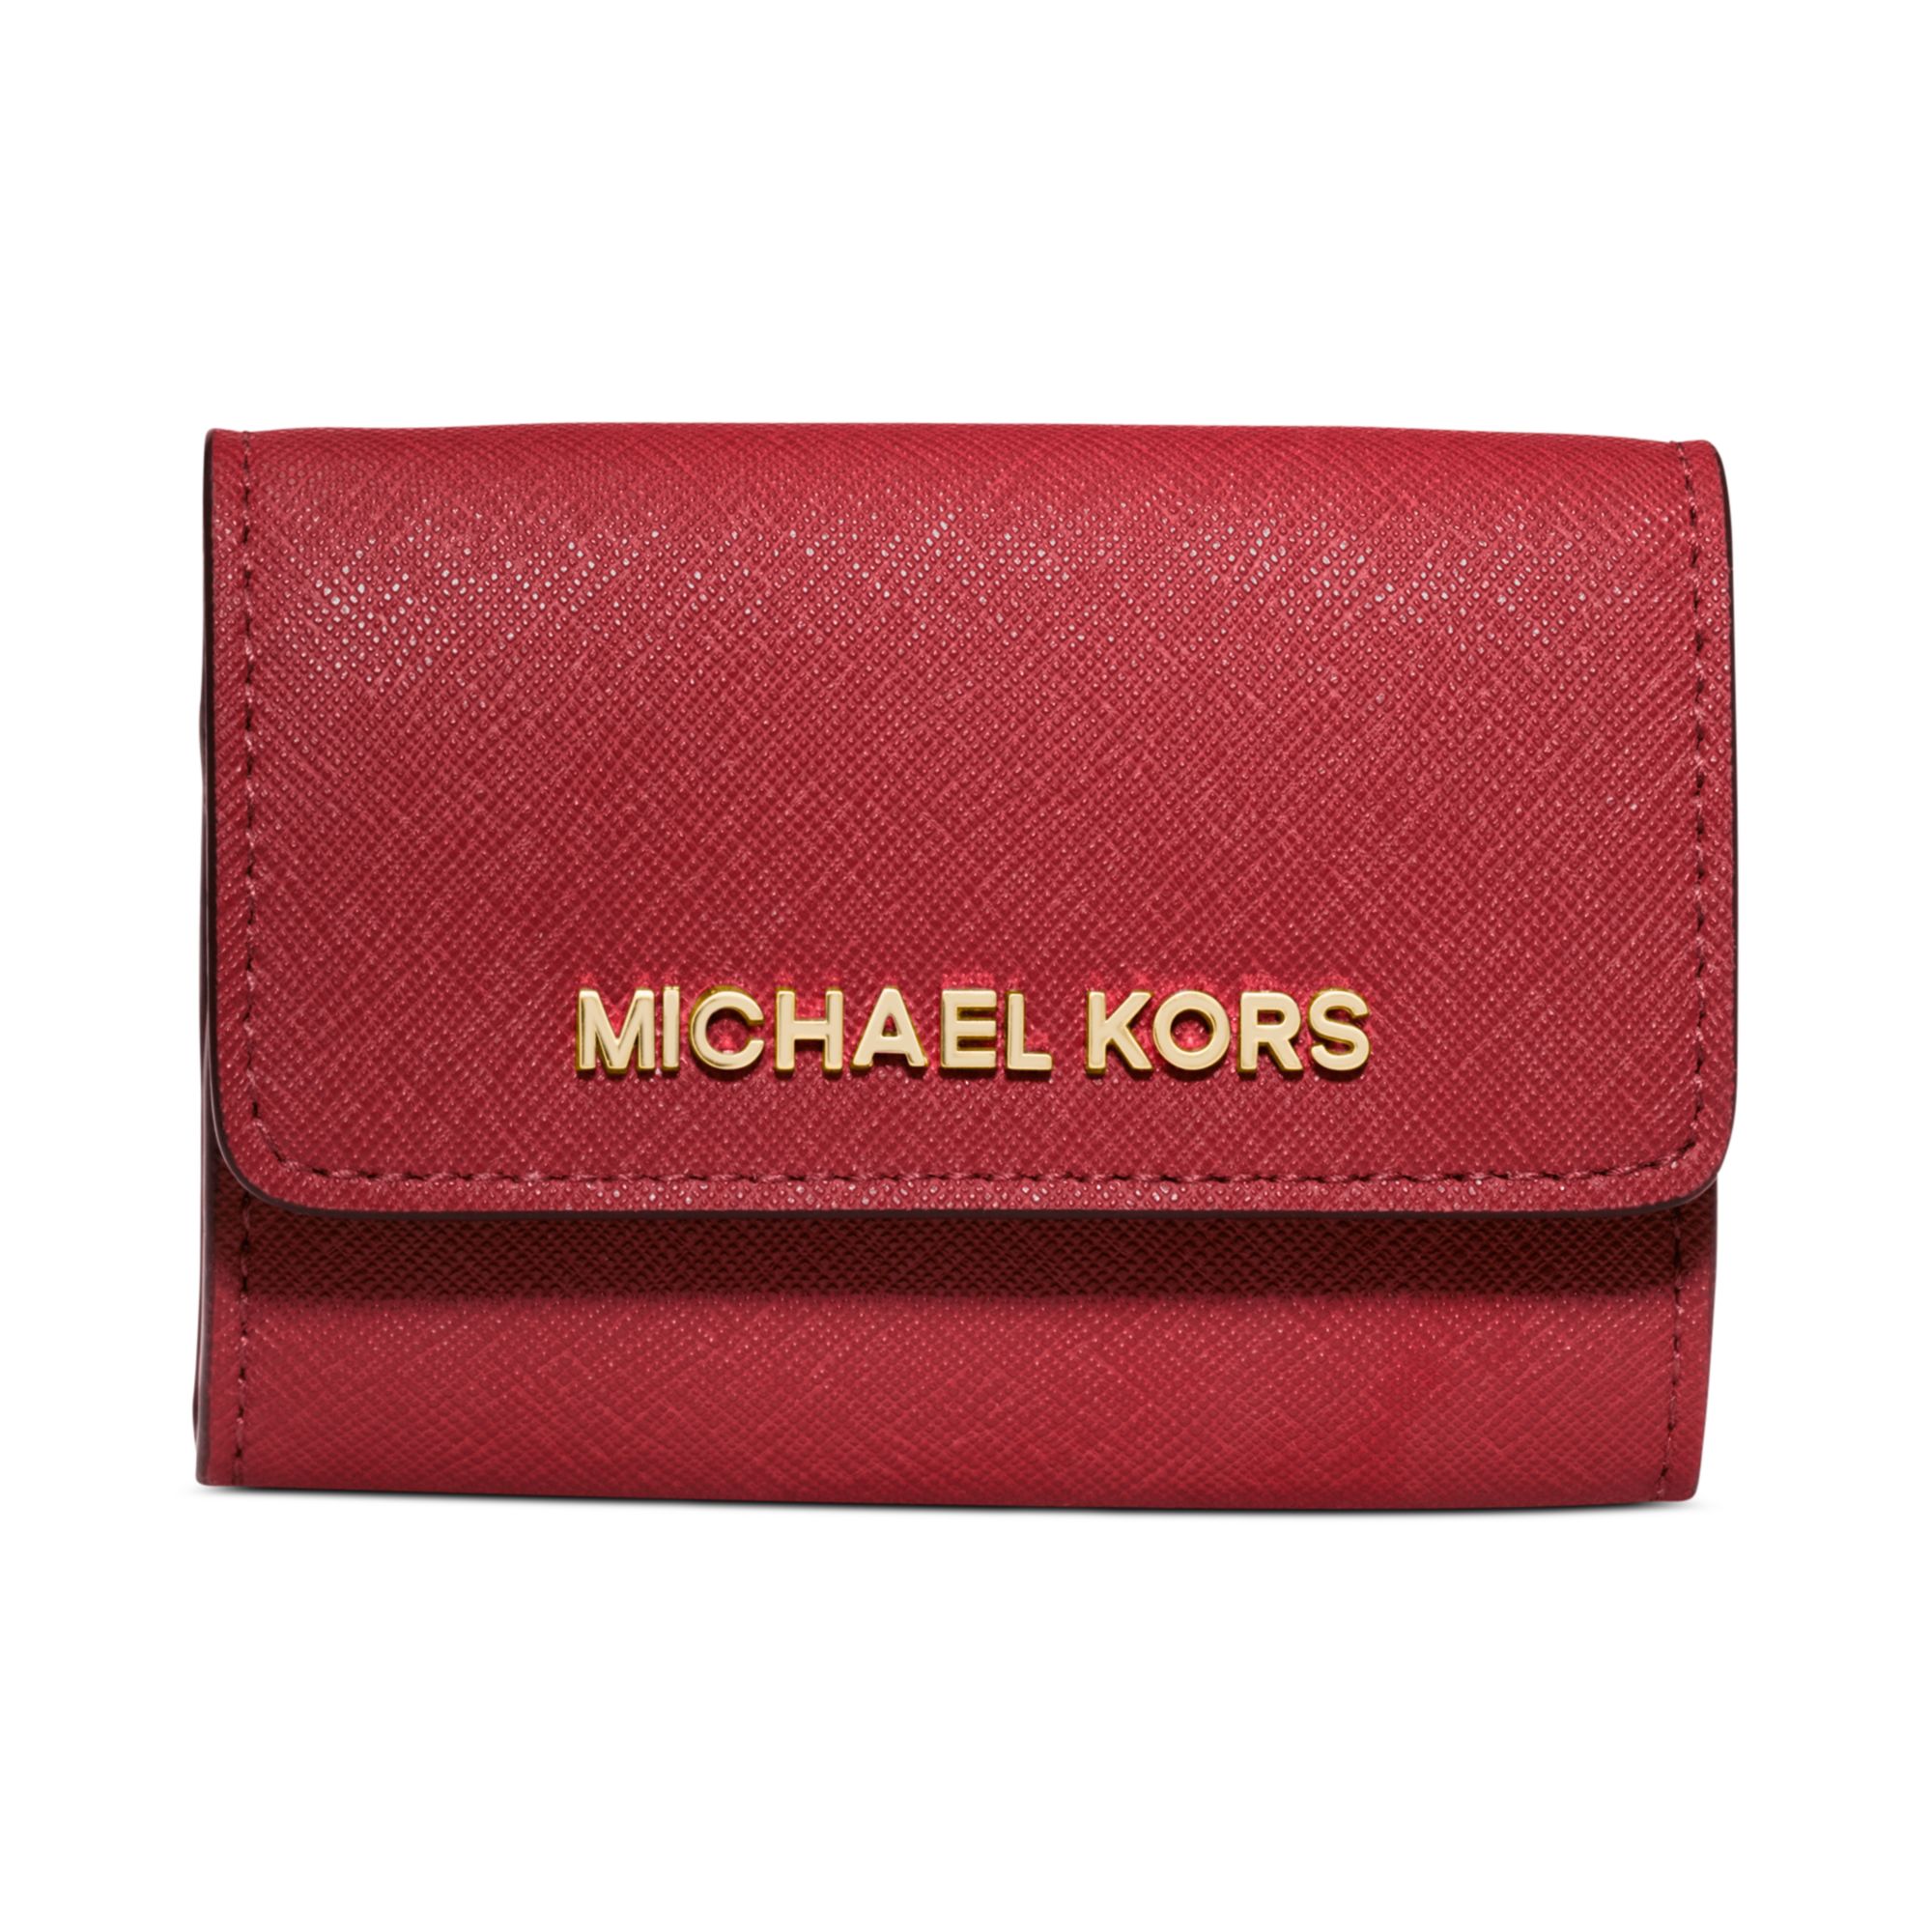 Michael Kors Jet Set Travel Coin Purse in Red | Lyst